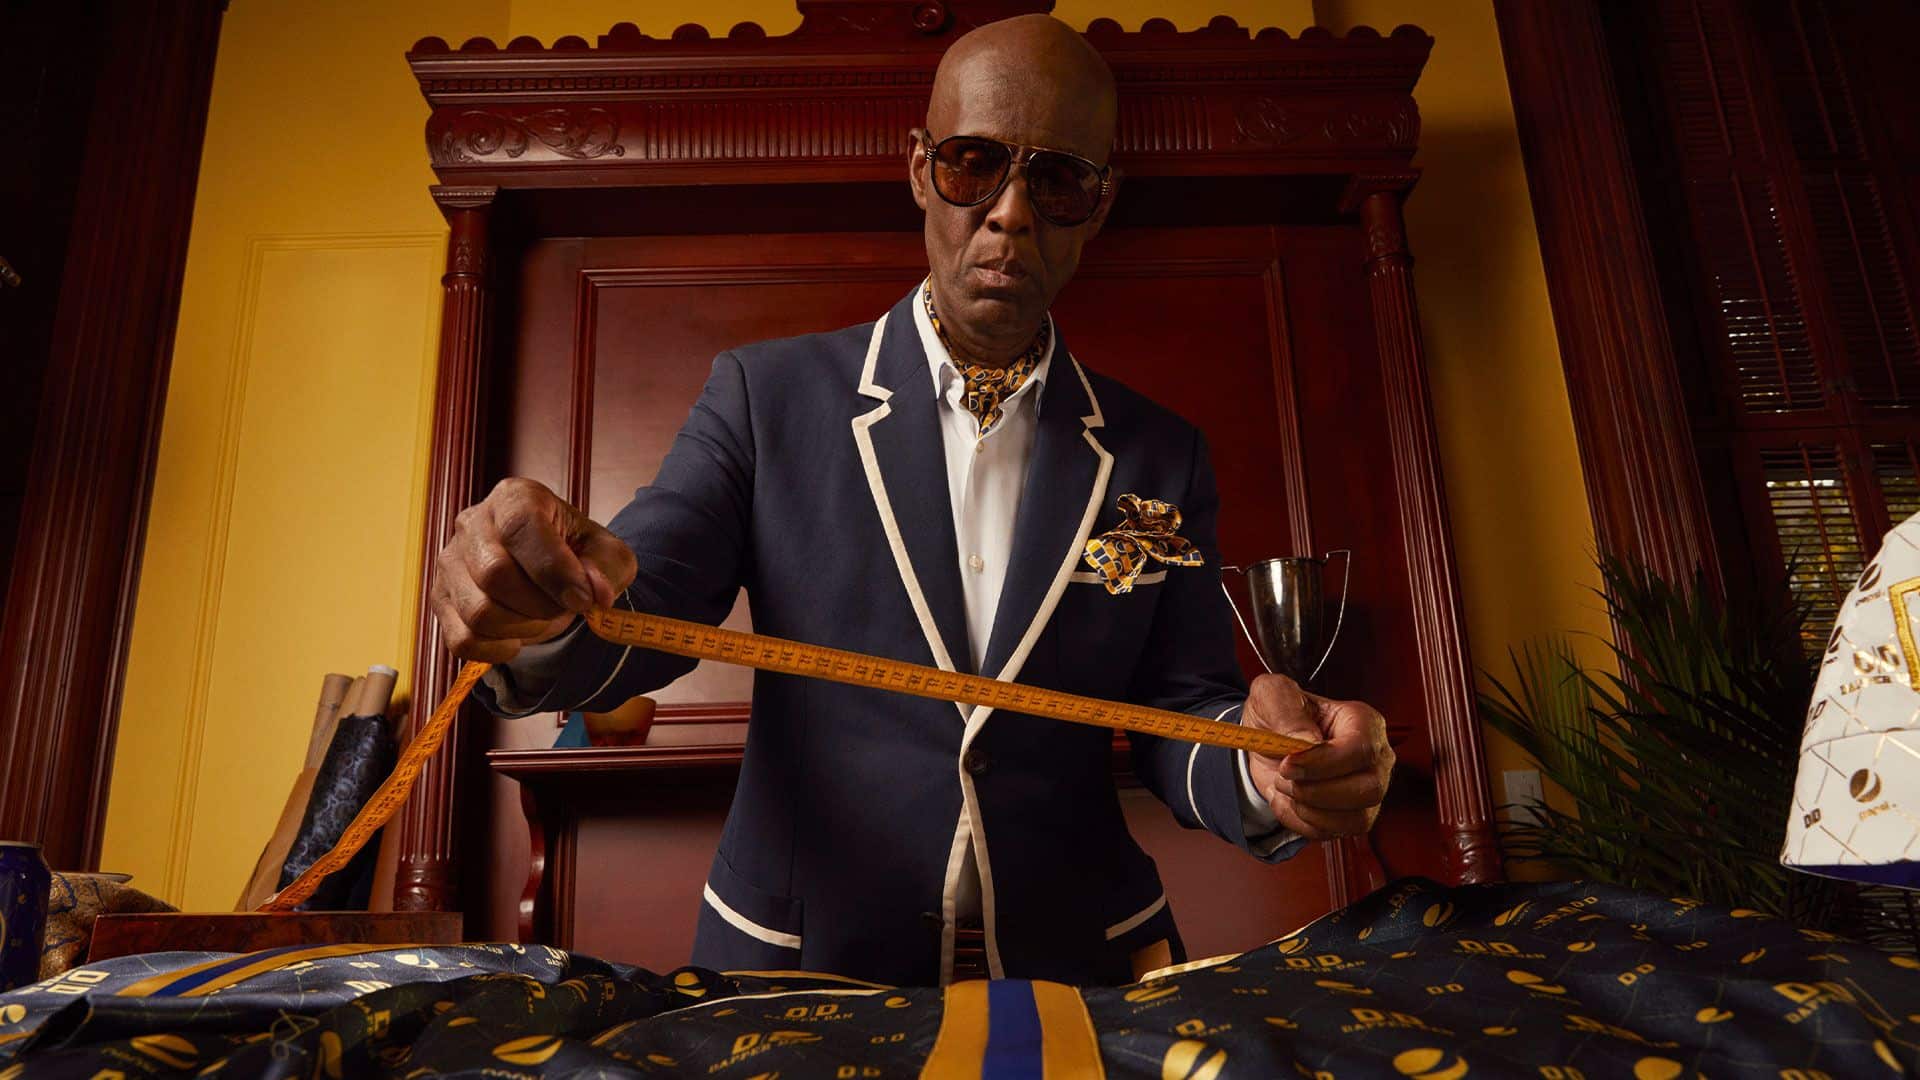 Dapper Dan' Gets Back to Harlem's Roots - The New York Times